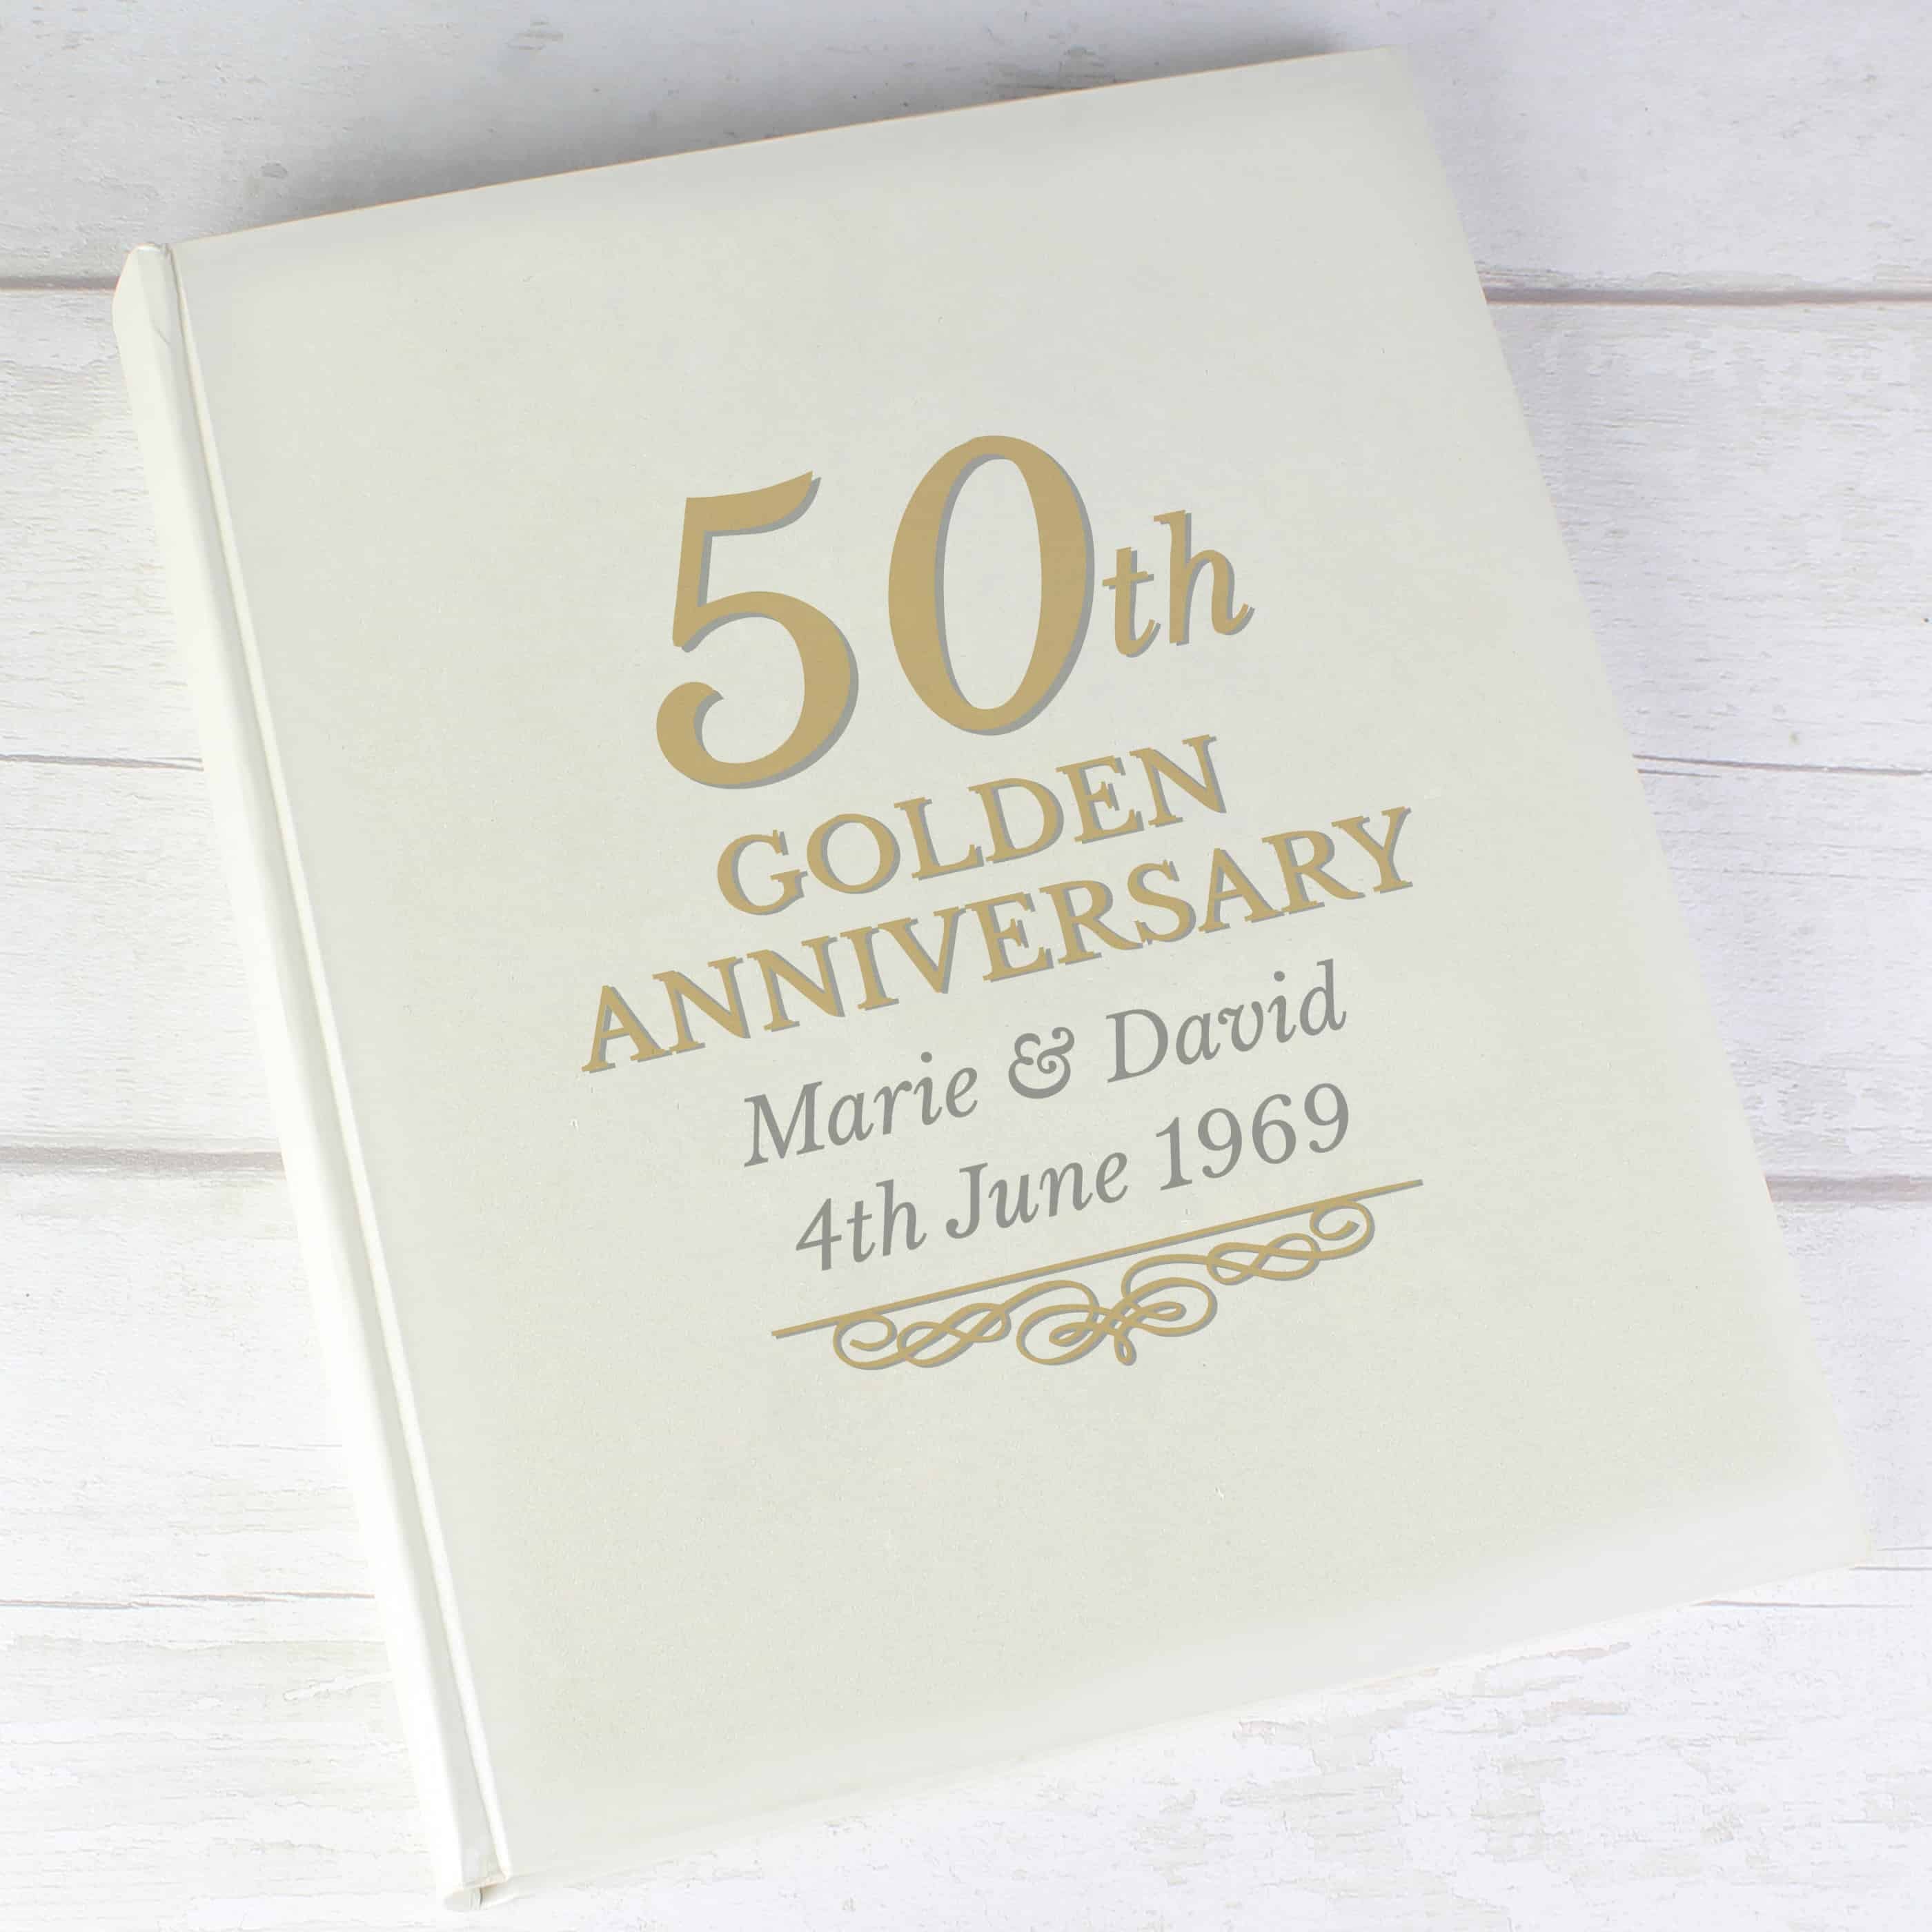 50th wedding anniversary personalised photo album. gold writing on the front and can be personalised over 2 lines. 